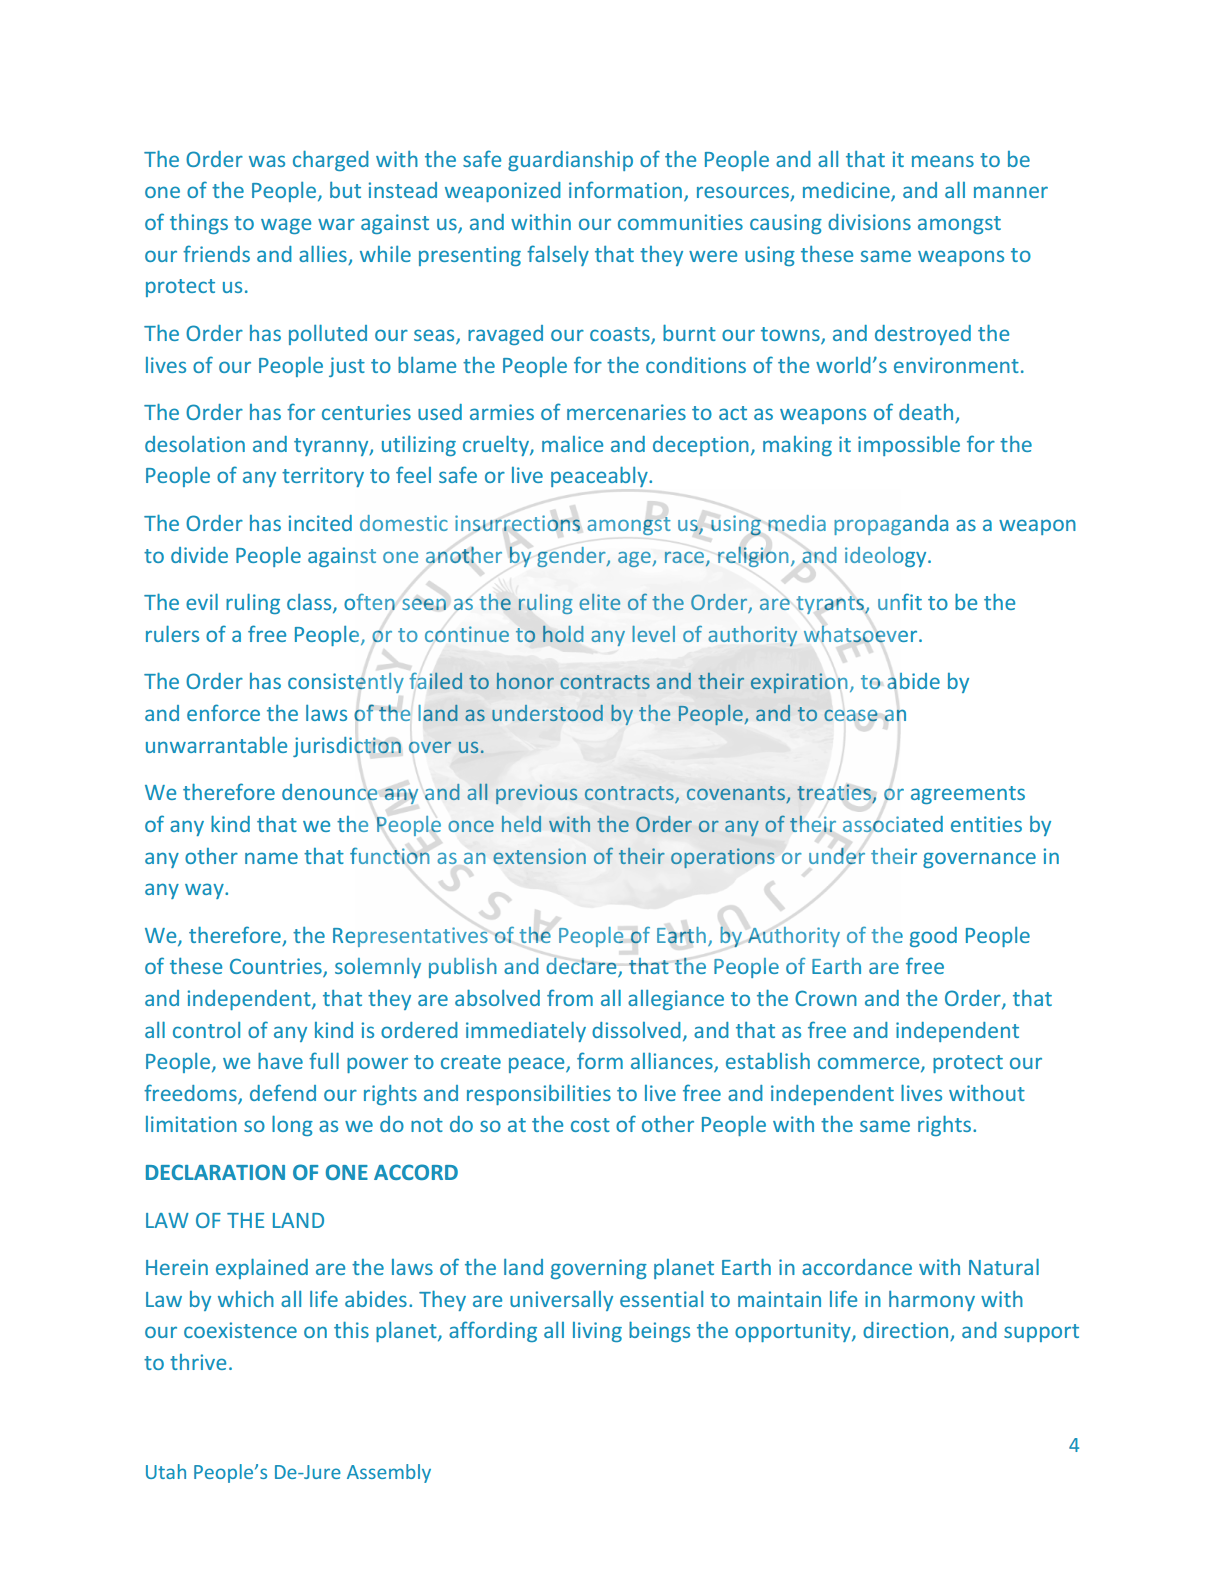 New Declaration of Independencepng_Page4